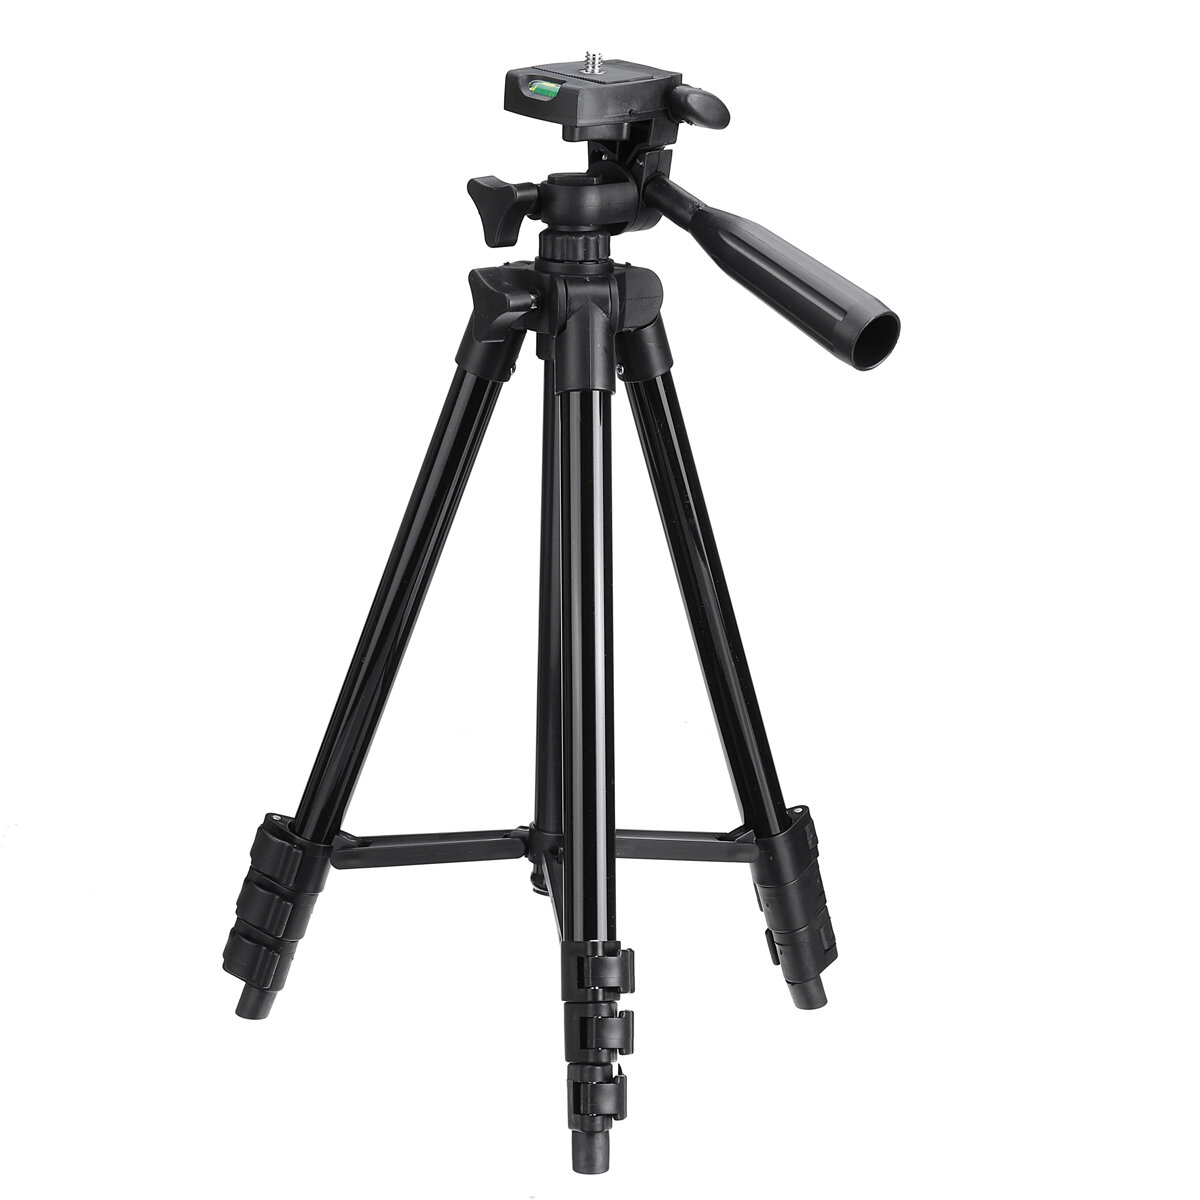 35-103cm Extendable Adjustable Tripod Stand Phone Holder Camera Clip Camping Travel Photography Tripod 